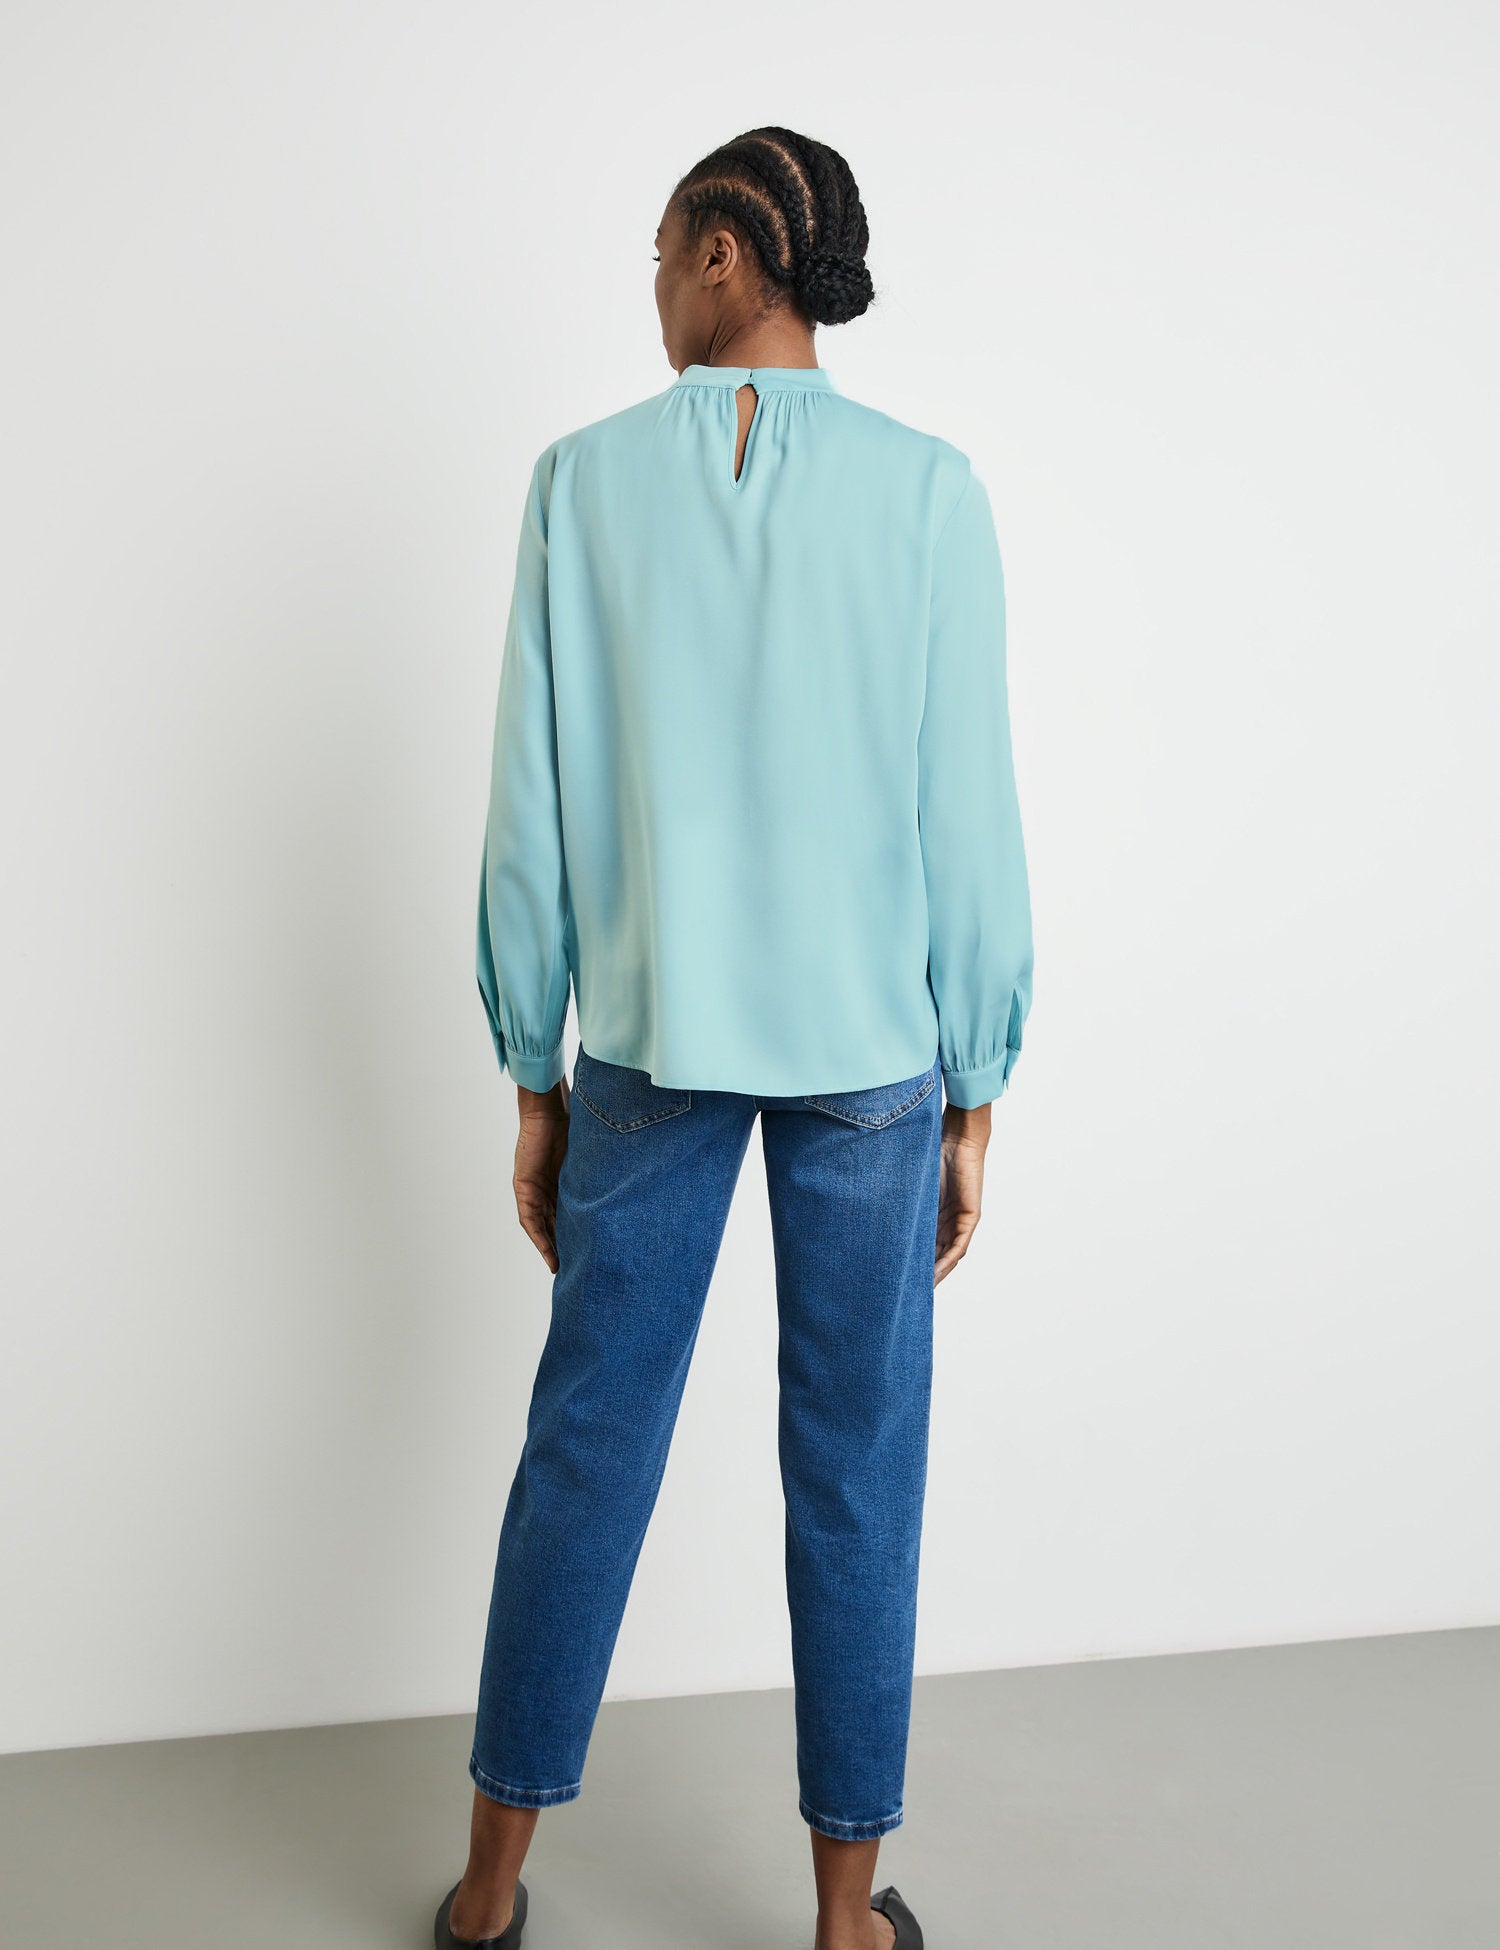 Flowing Blouse With A Stand-Up Collar_360067-31460_80938_06